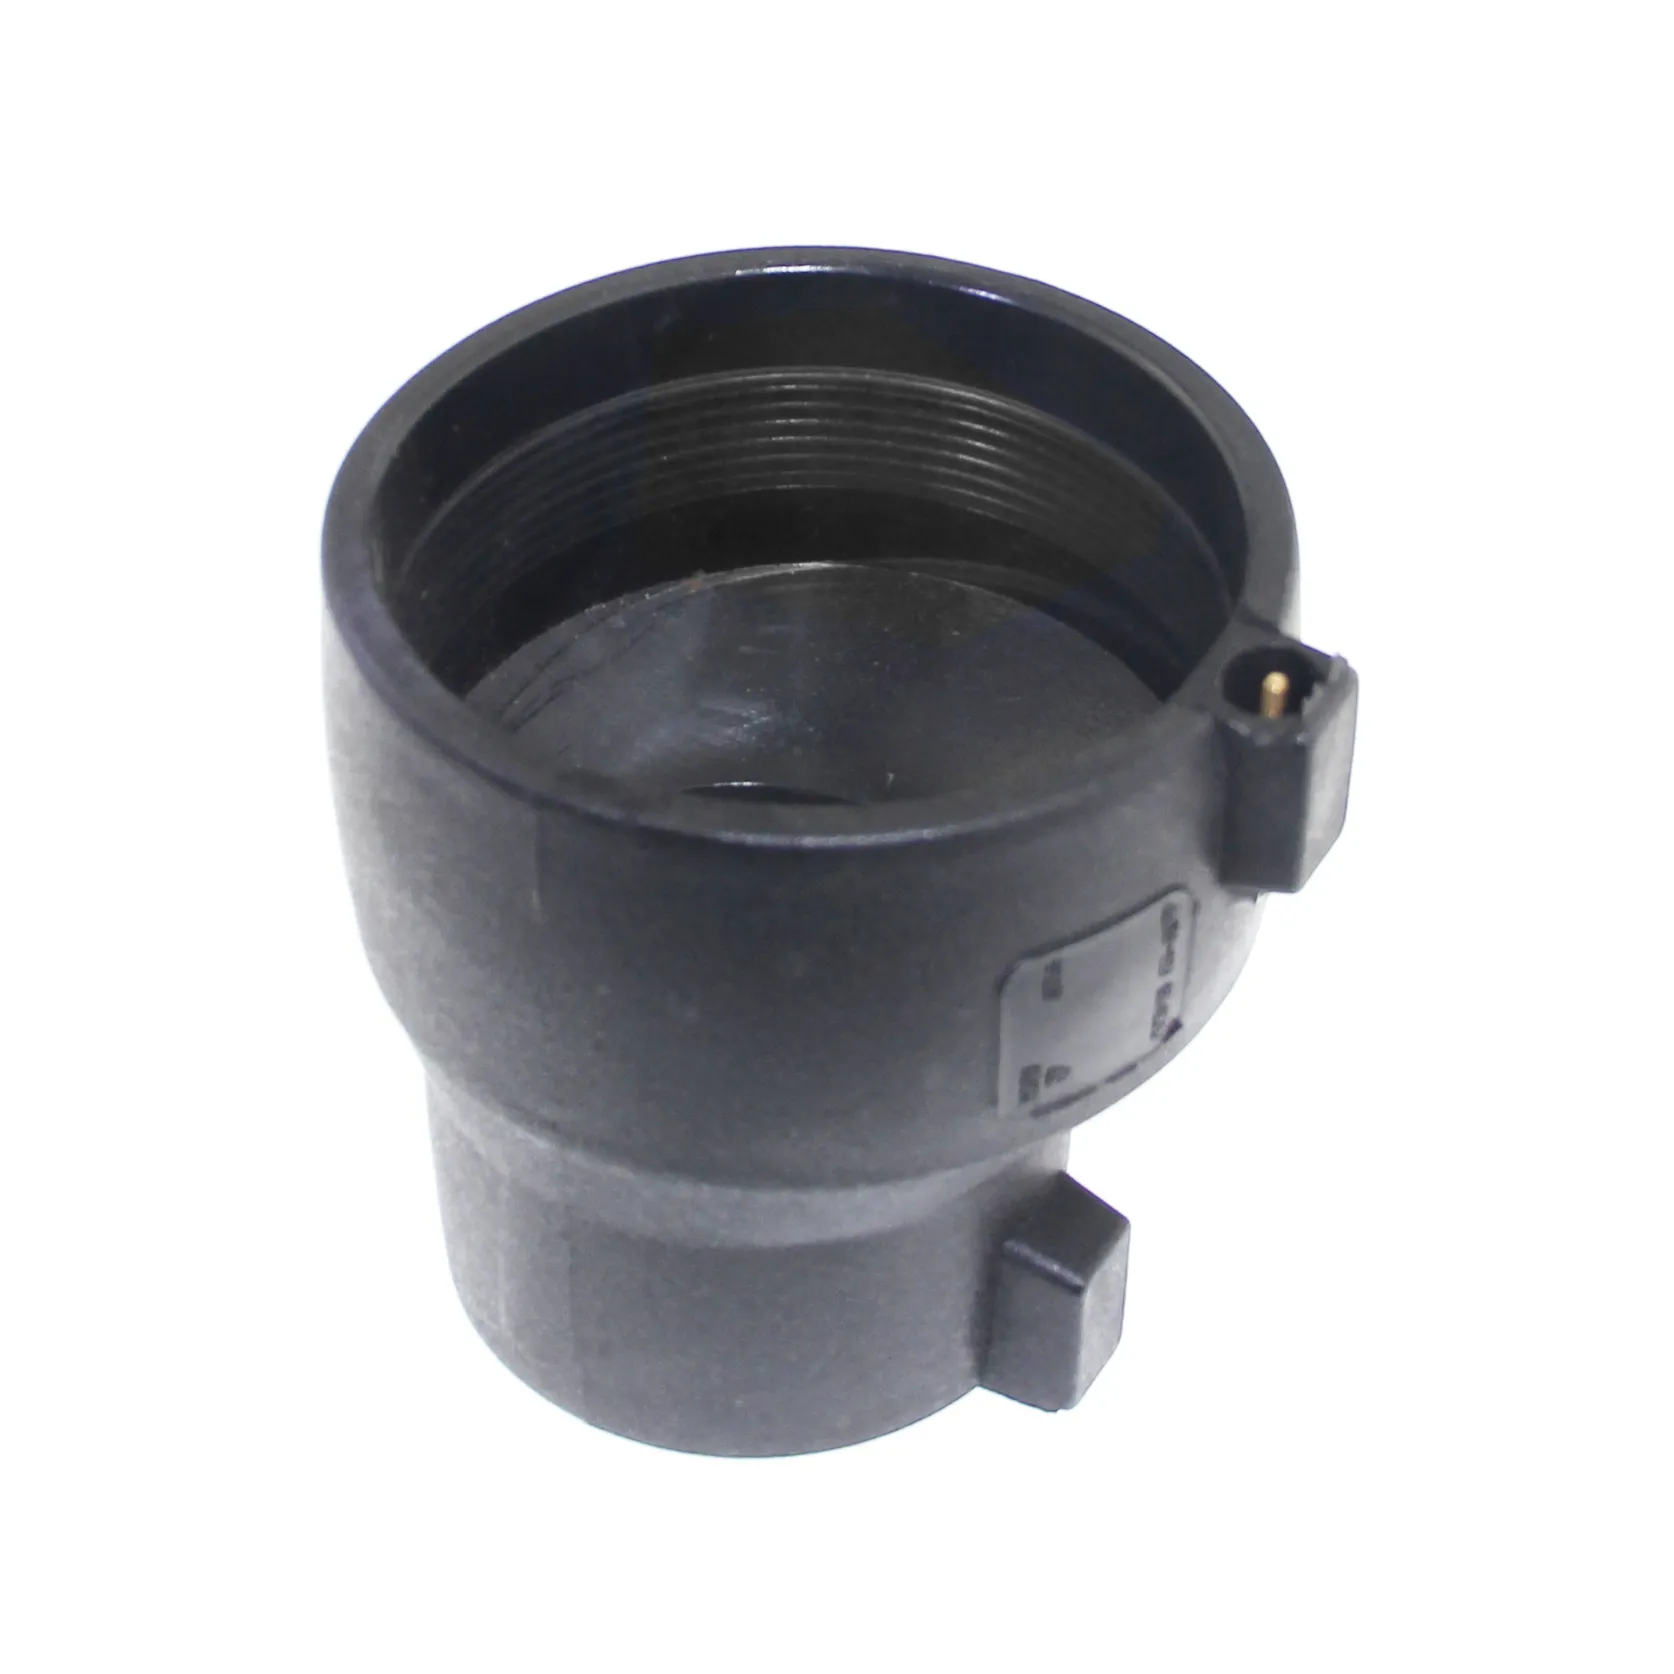 BS-P2YJ various styles high quality pneumatic pvc hdpe pipe fitting